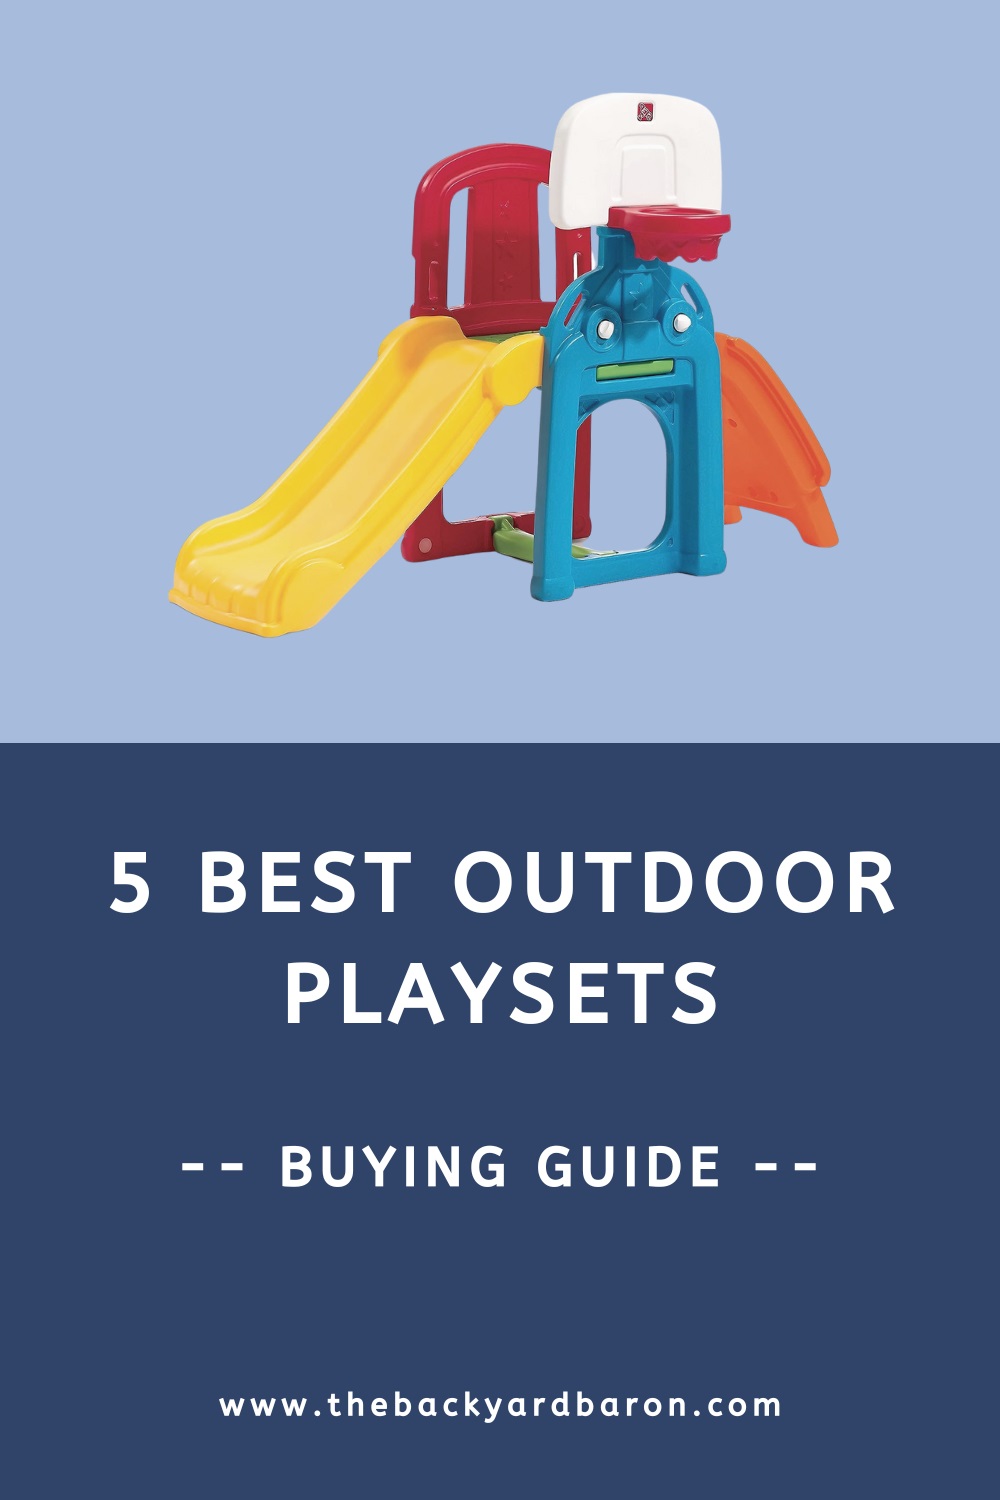 Plastic outdoor playset buying guide